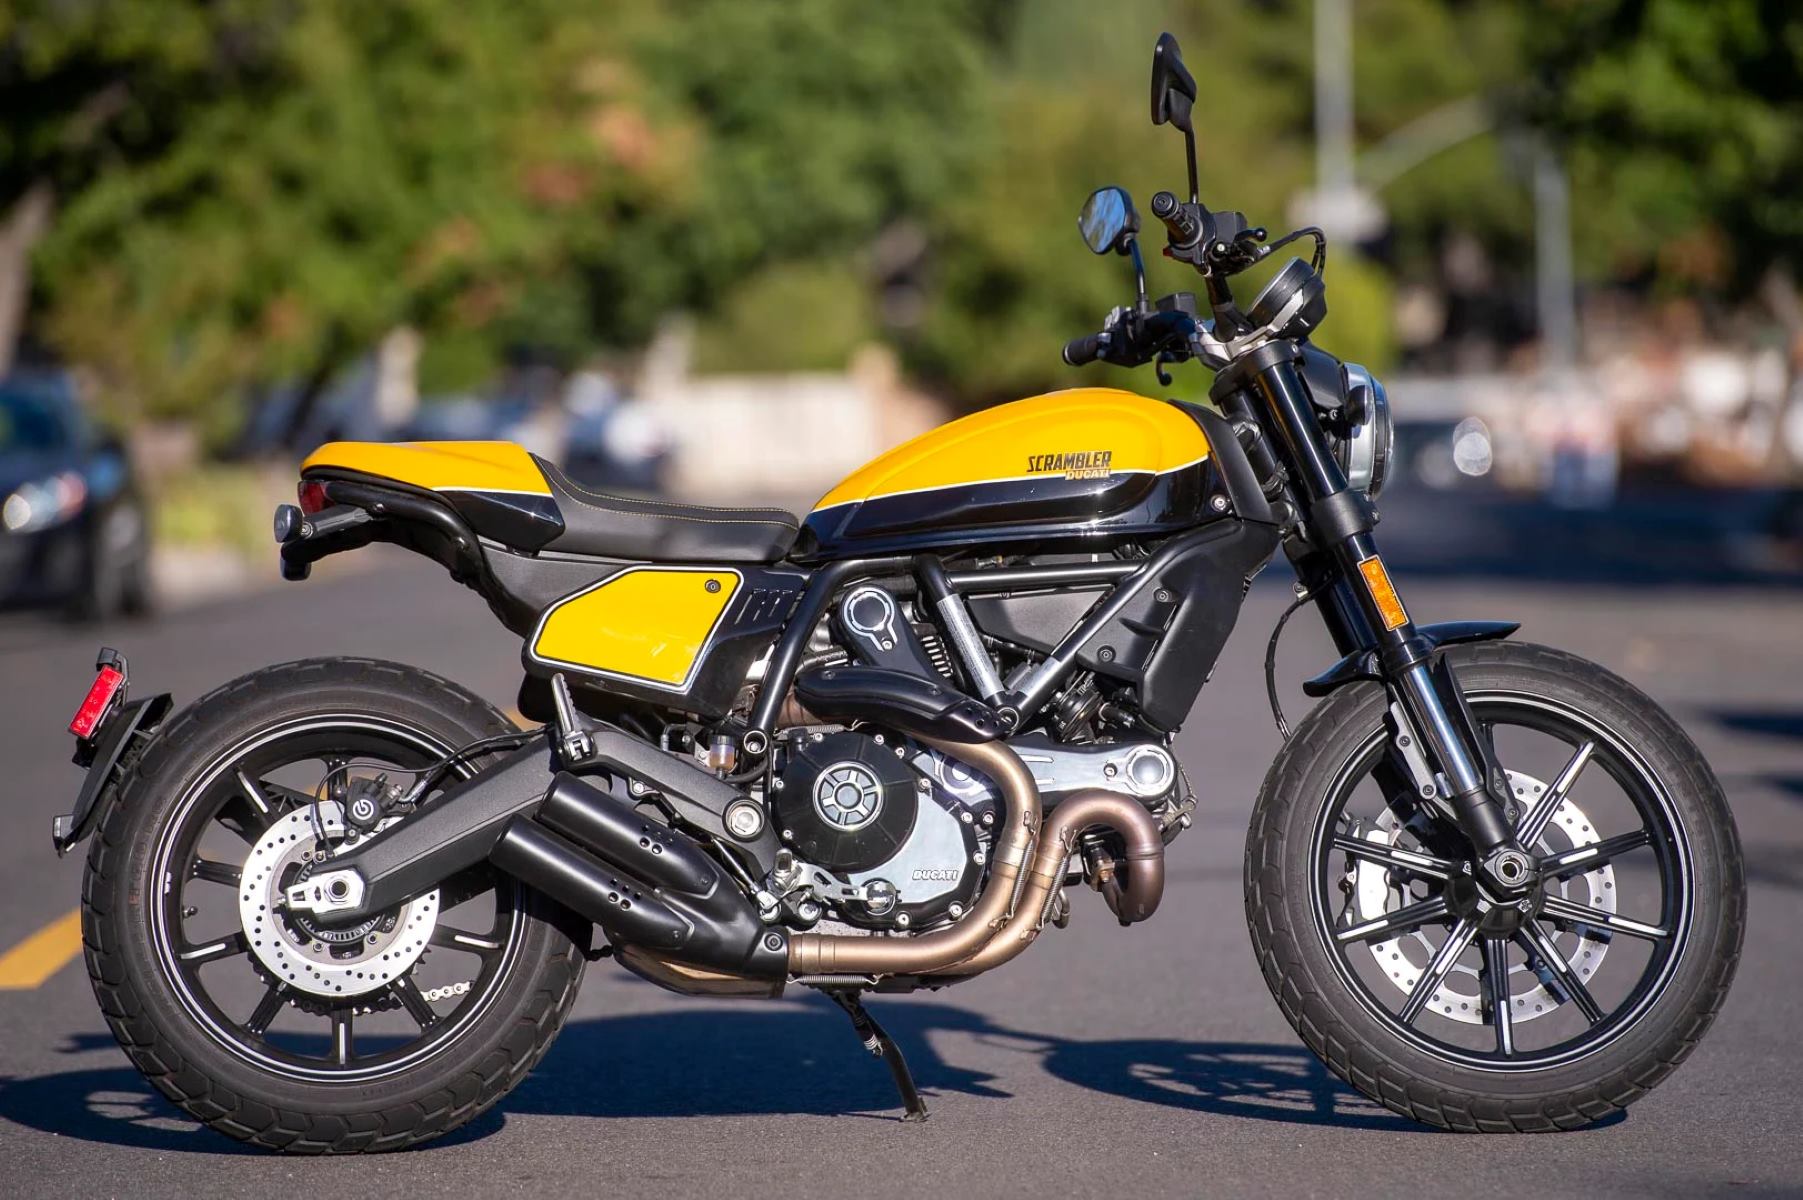 15 Captivating Facts About Ducati Scrambler Full Throttle Facts net